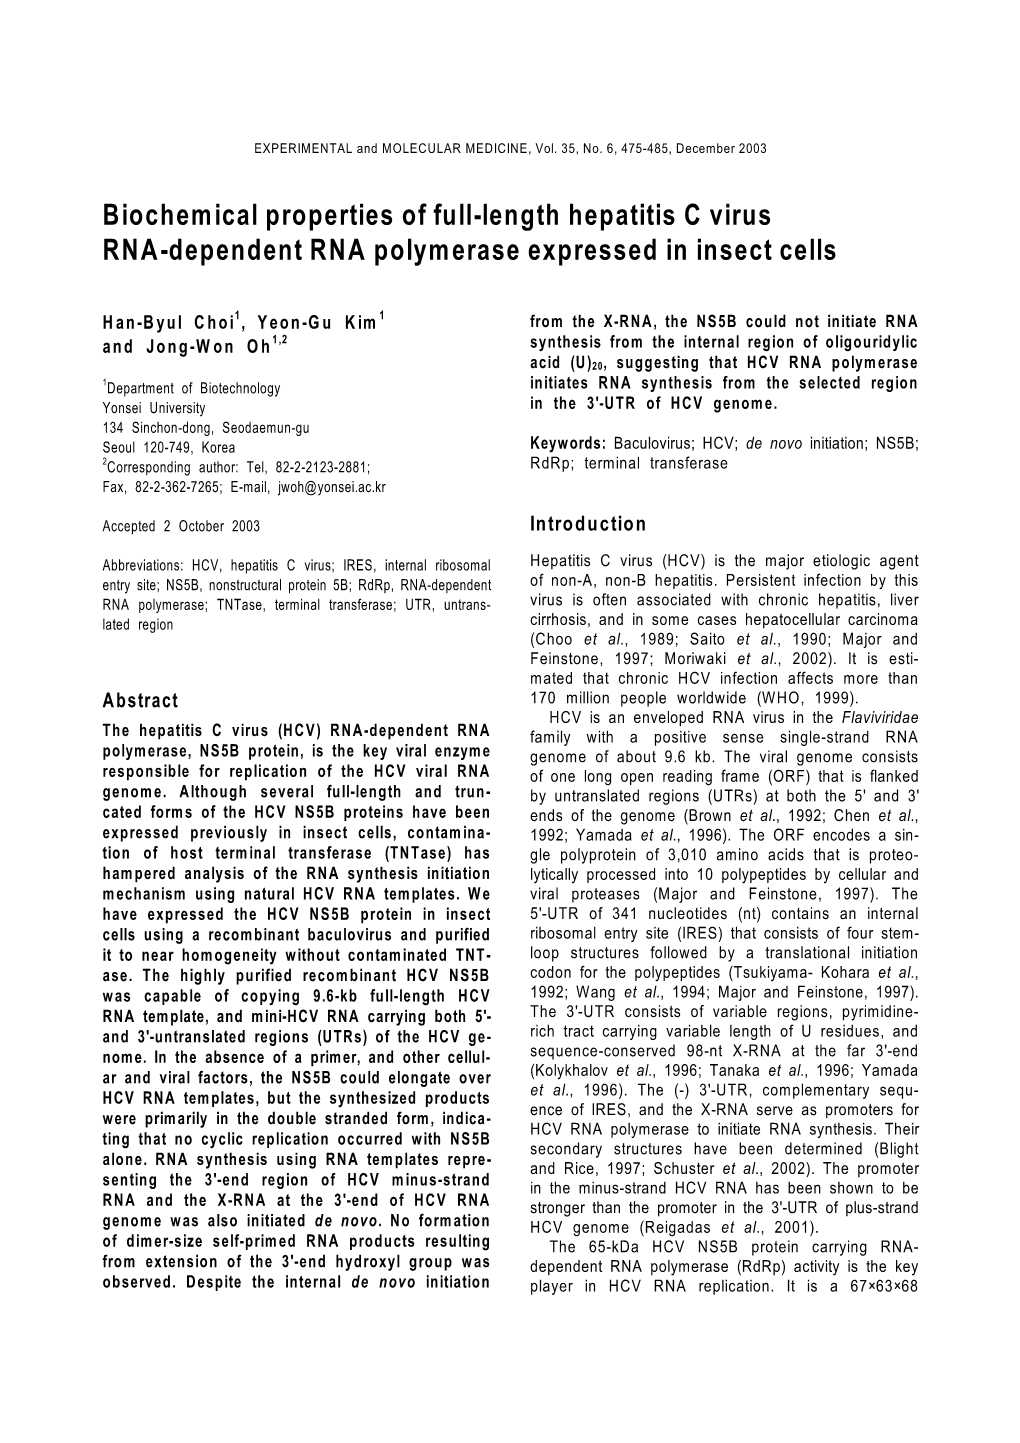 Biochemical Properties of Full-Length Hepatitis C Virus RNA-Dependent RNA Polymerase Expressed in Insect Cells